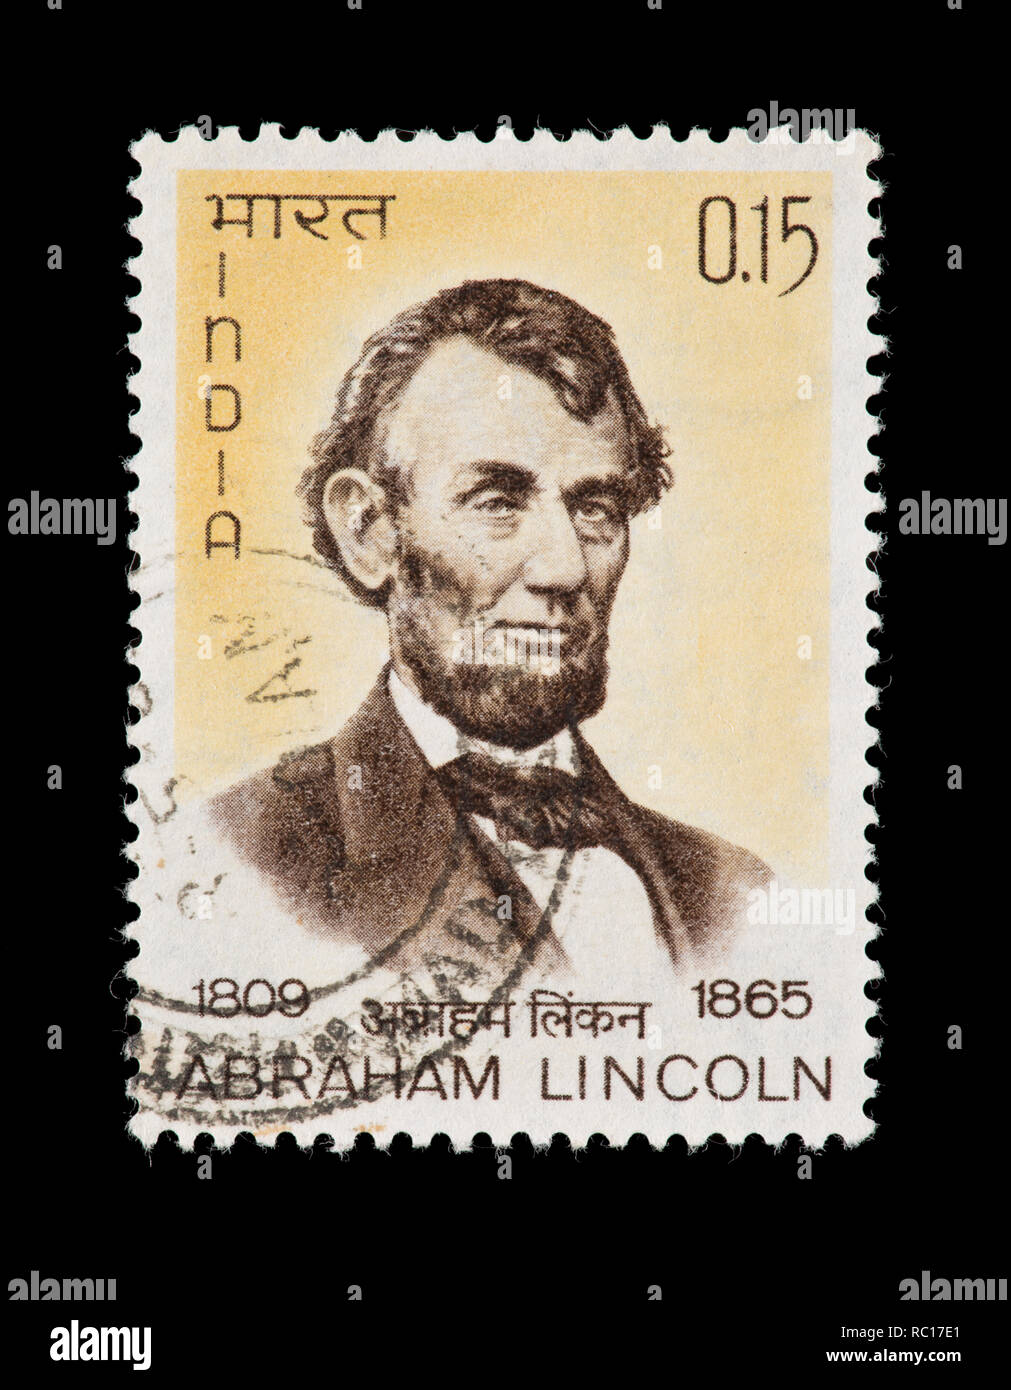 Postage stamp fro India depicting Abraham Lincoln, centennial of death. Stock Photo